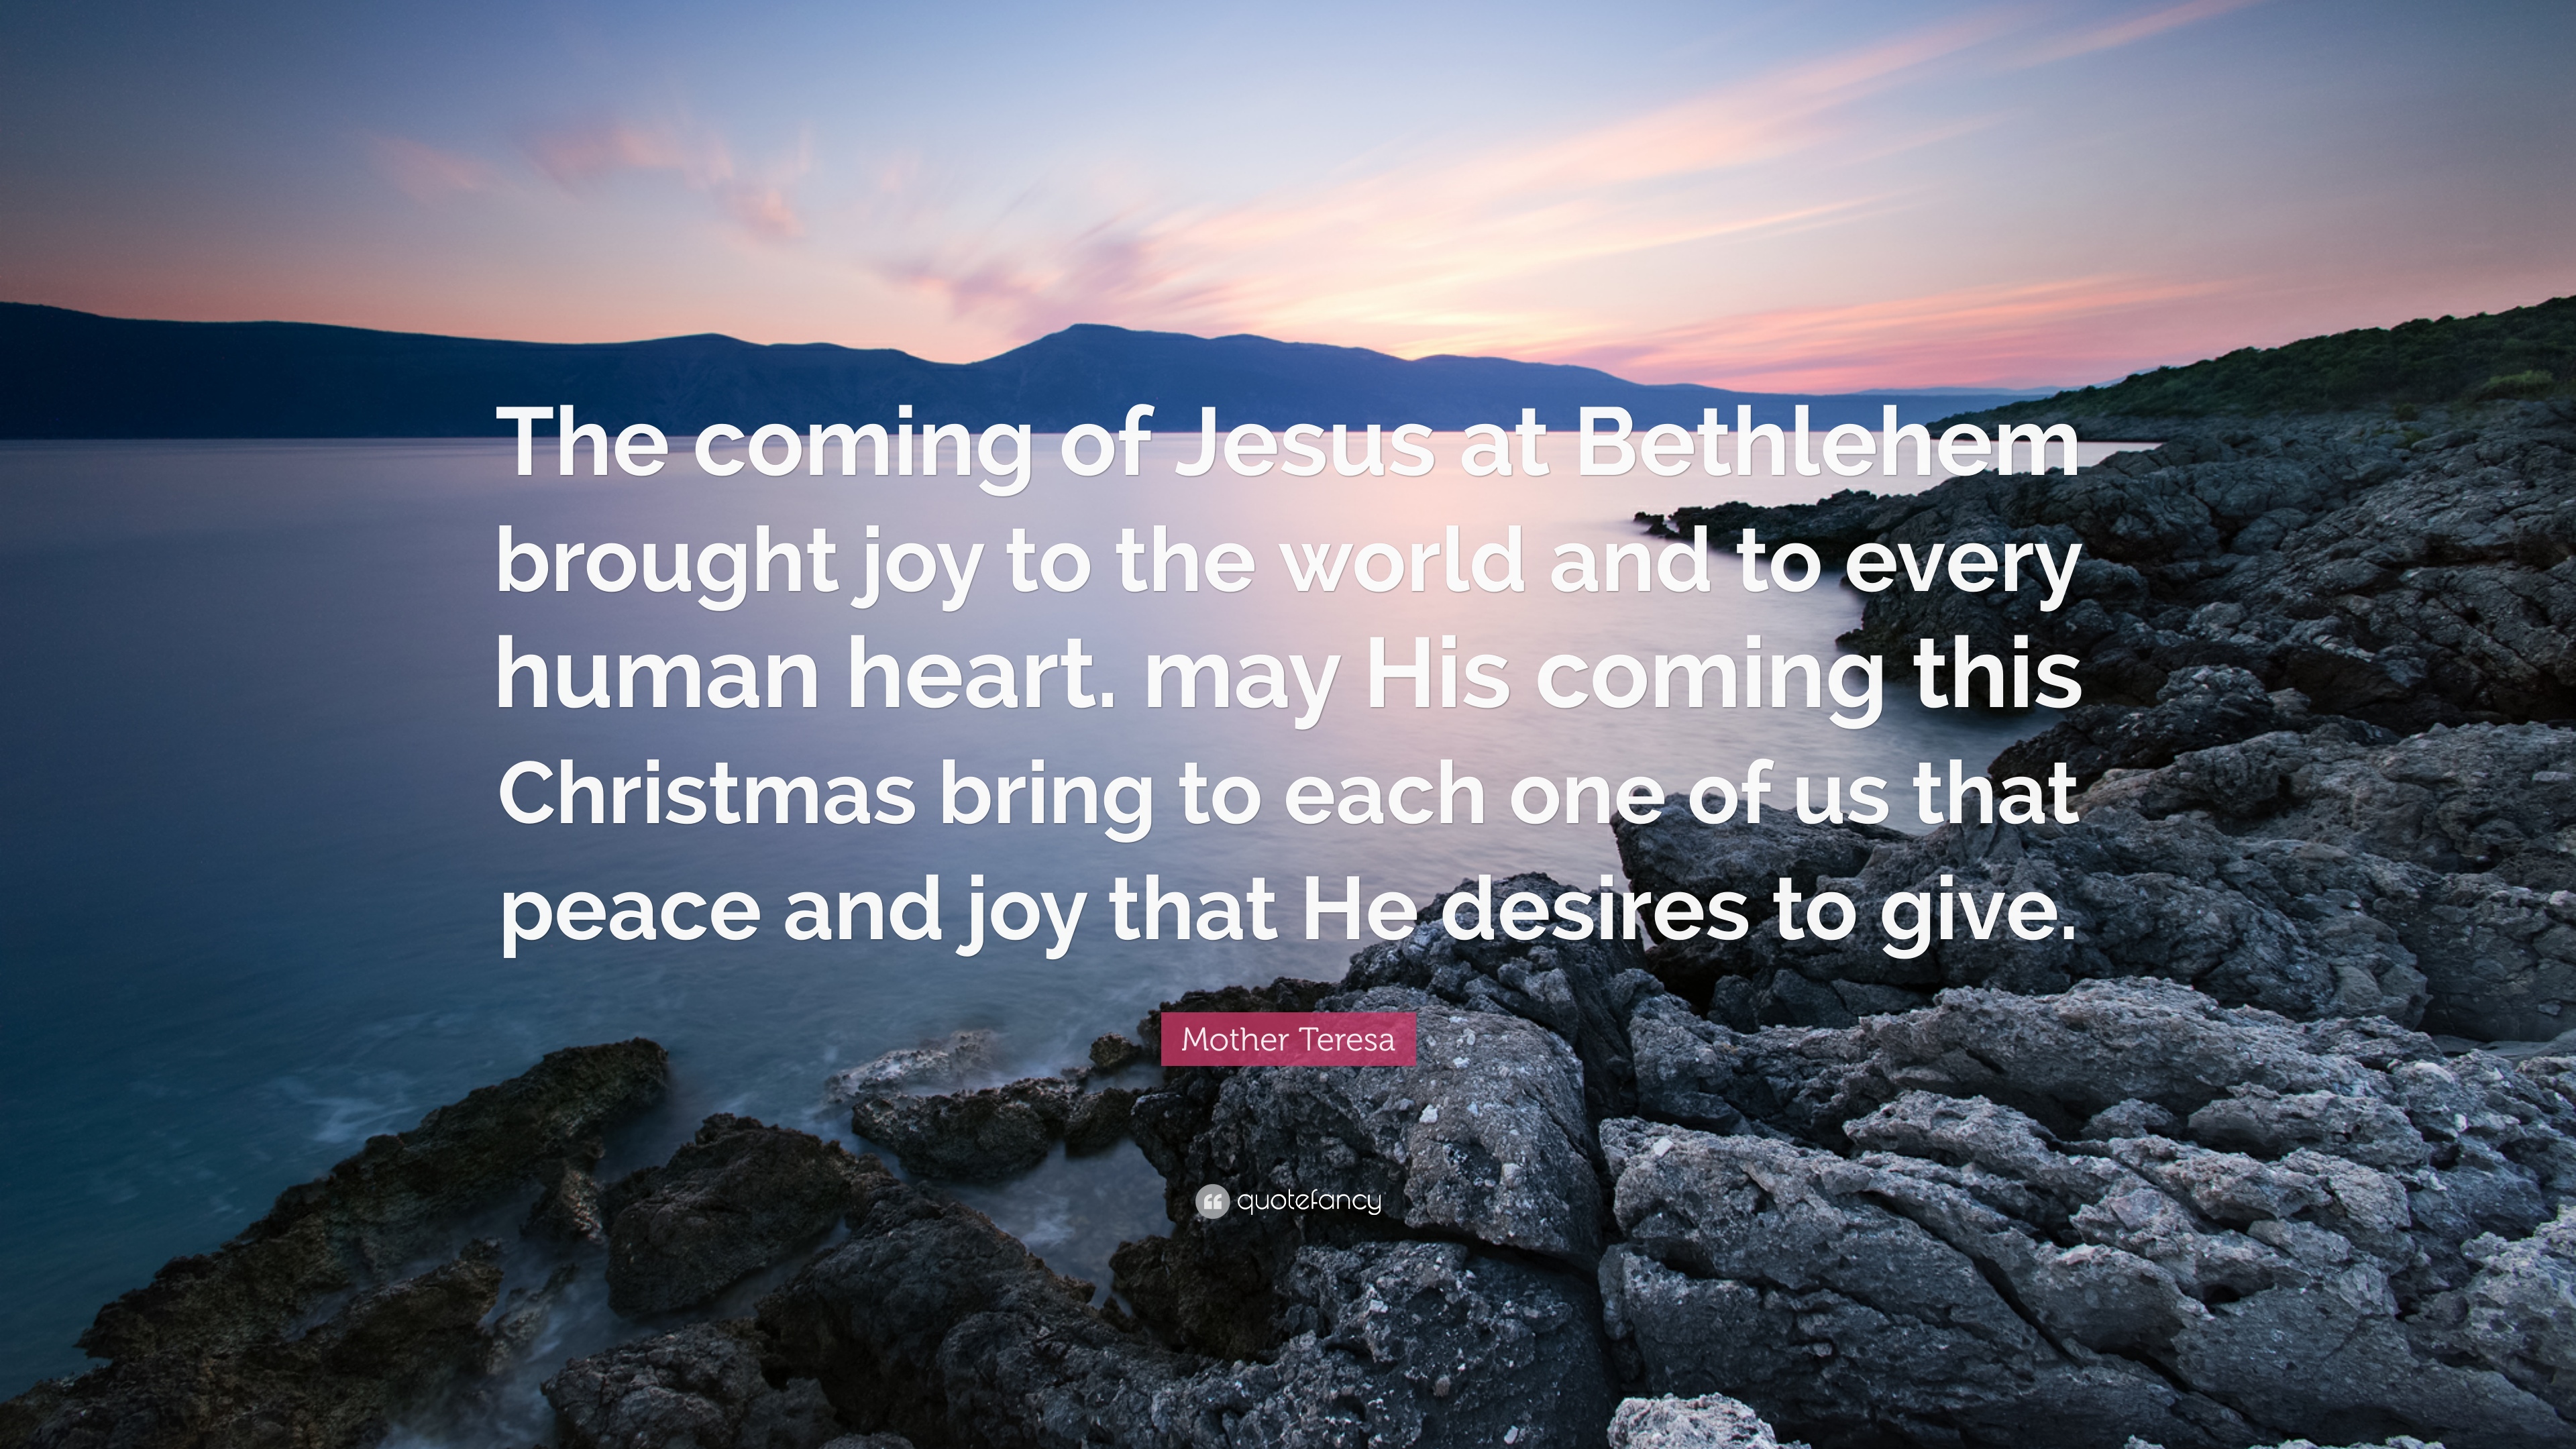 Mother Teresa Quote: “The coming of Jesus at Bethlehem brought joy to the world and to every human heart. may His coming this Christmas bring .”